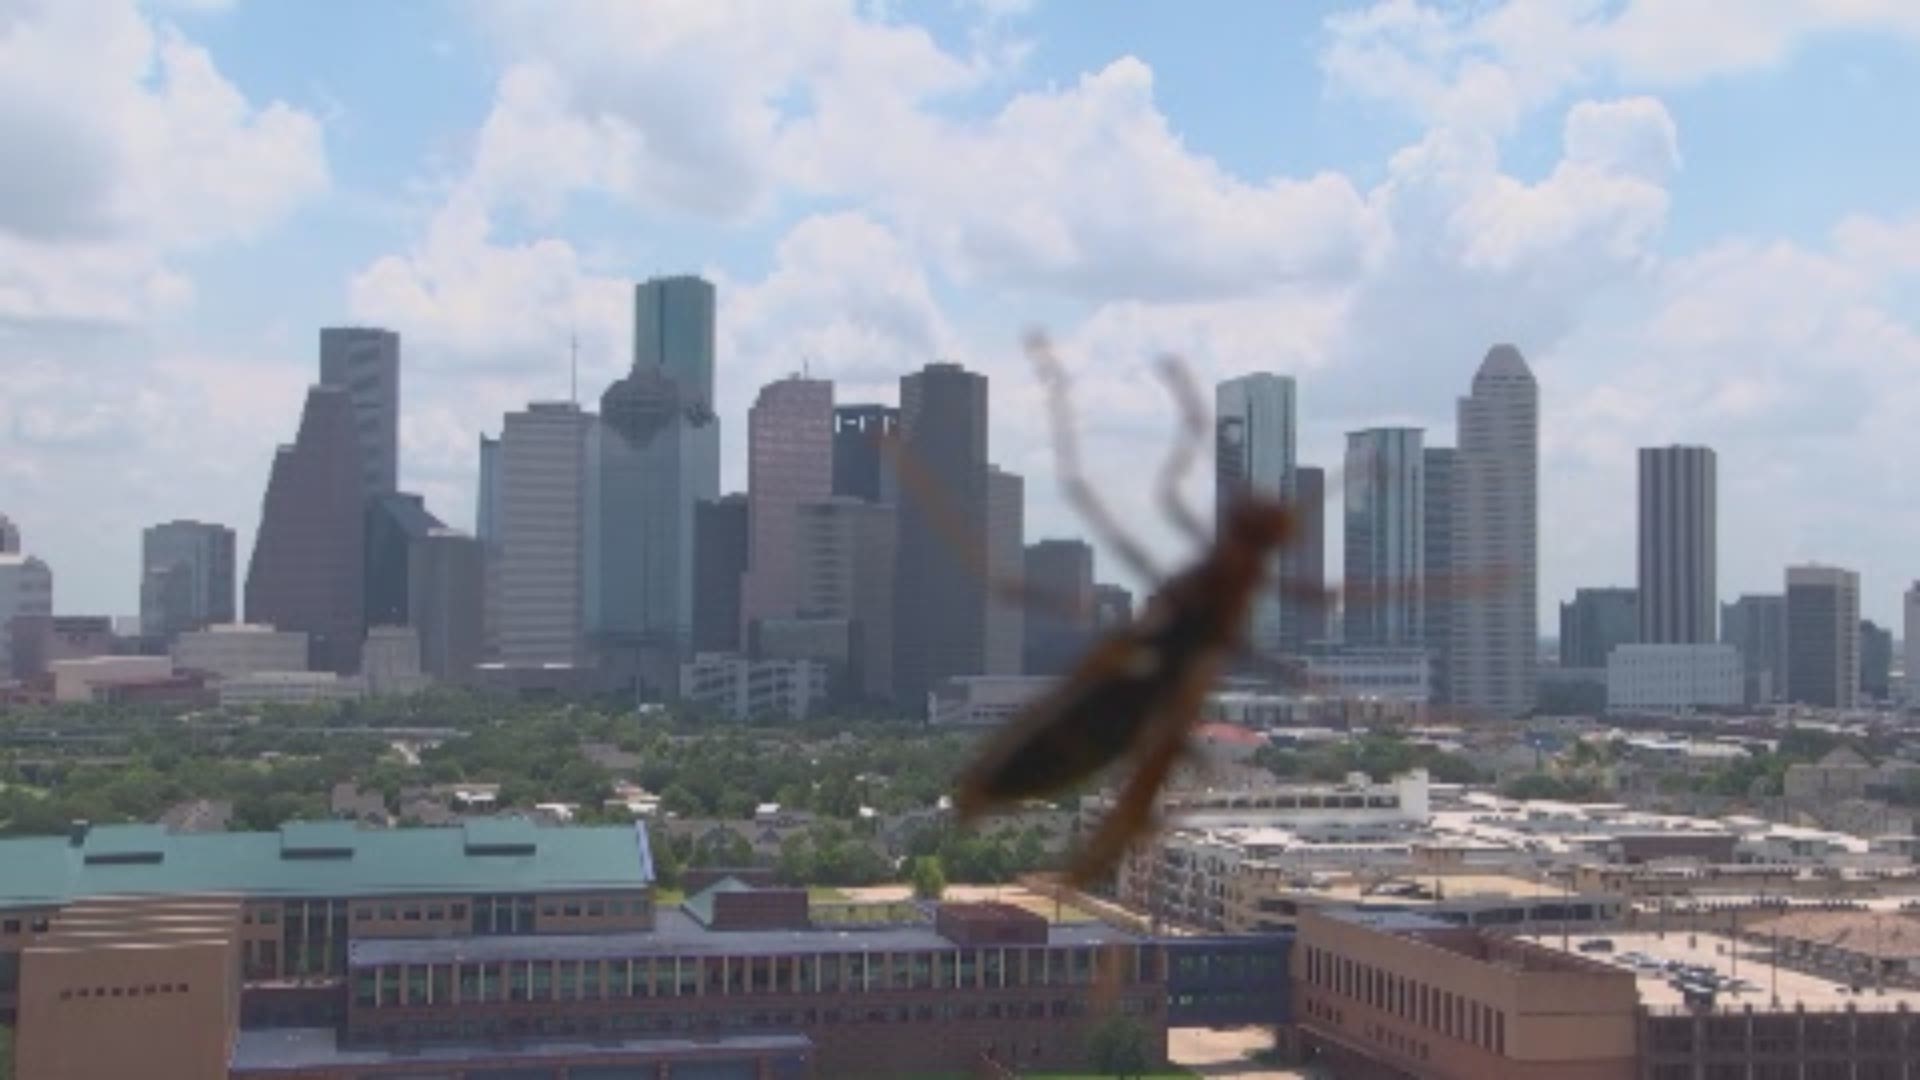 It looks like a giant wasp hovering over downtown Houston. It's really just a normal-size wasp that landed on our tower cam on Allen Parkway. Apparently, we have a new fan!